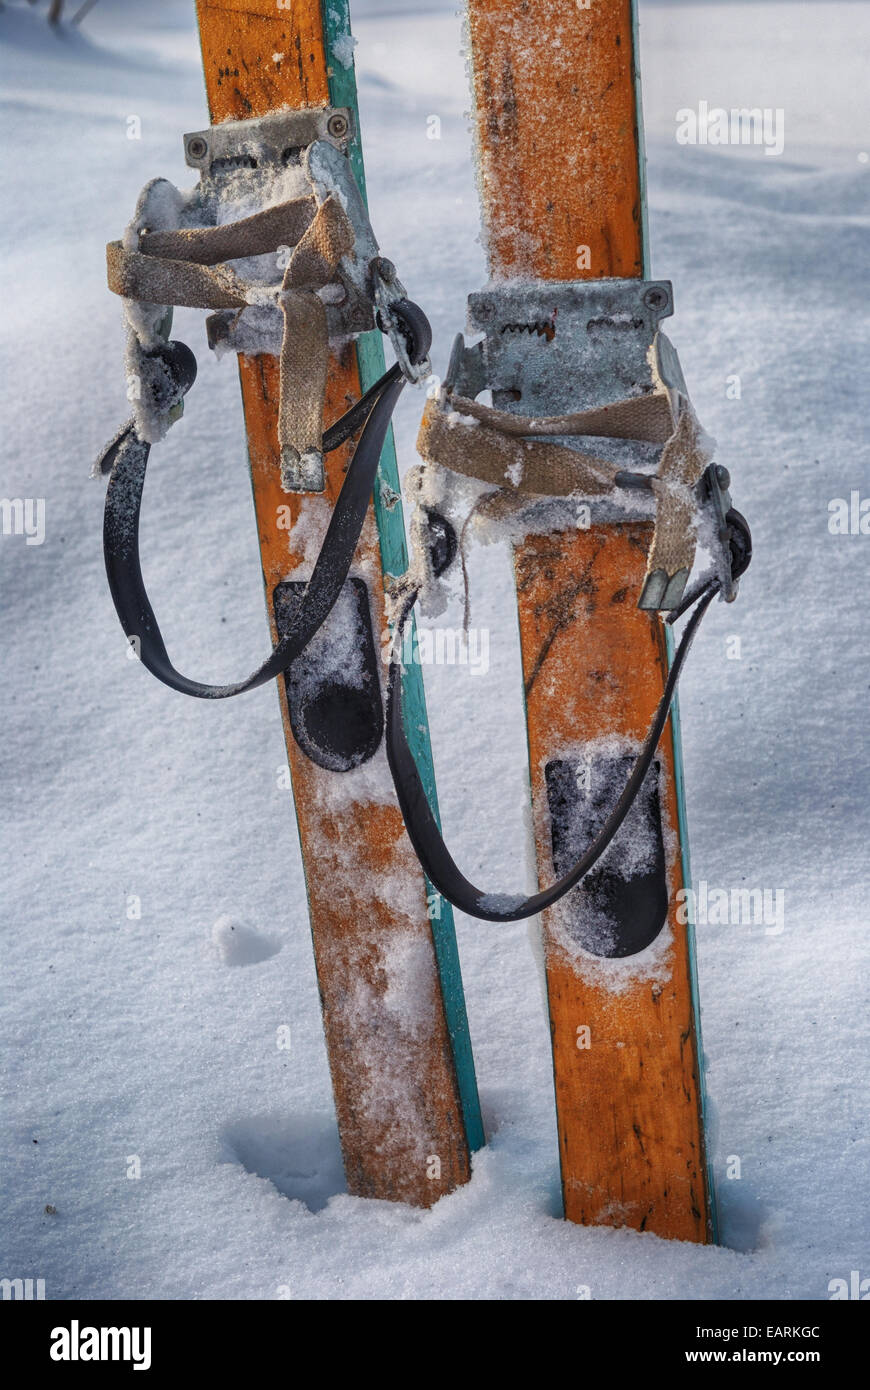 old wooden skis in the snow, vertical Stock Photo